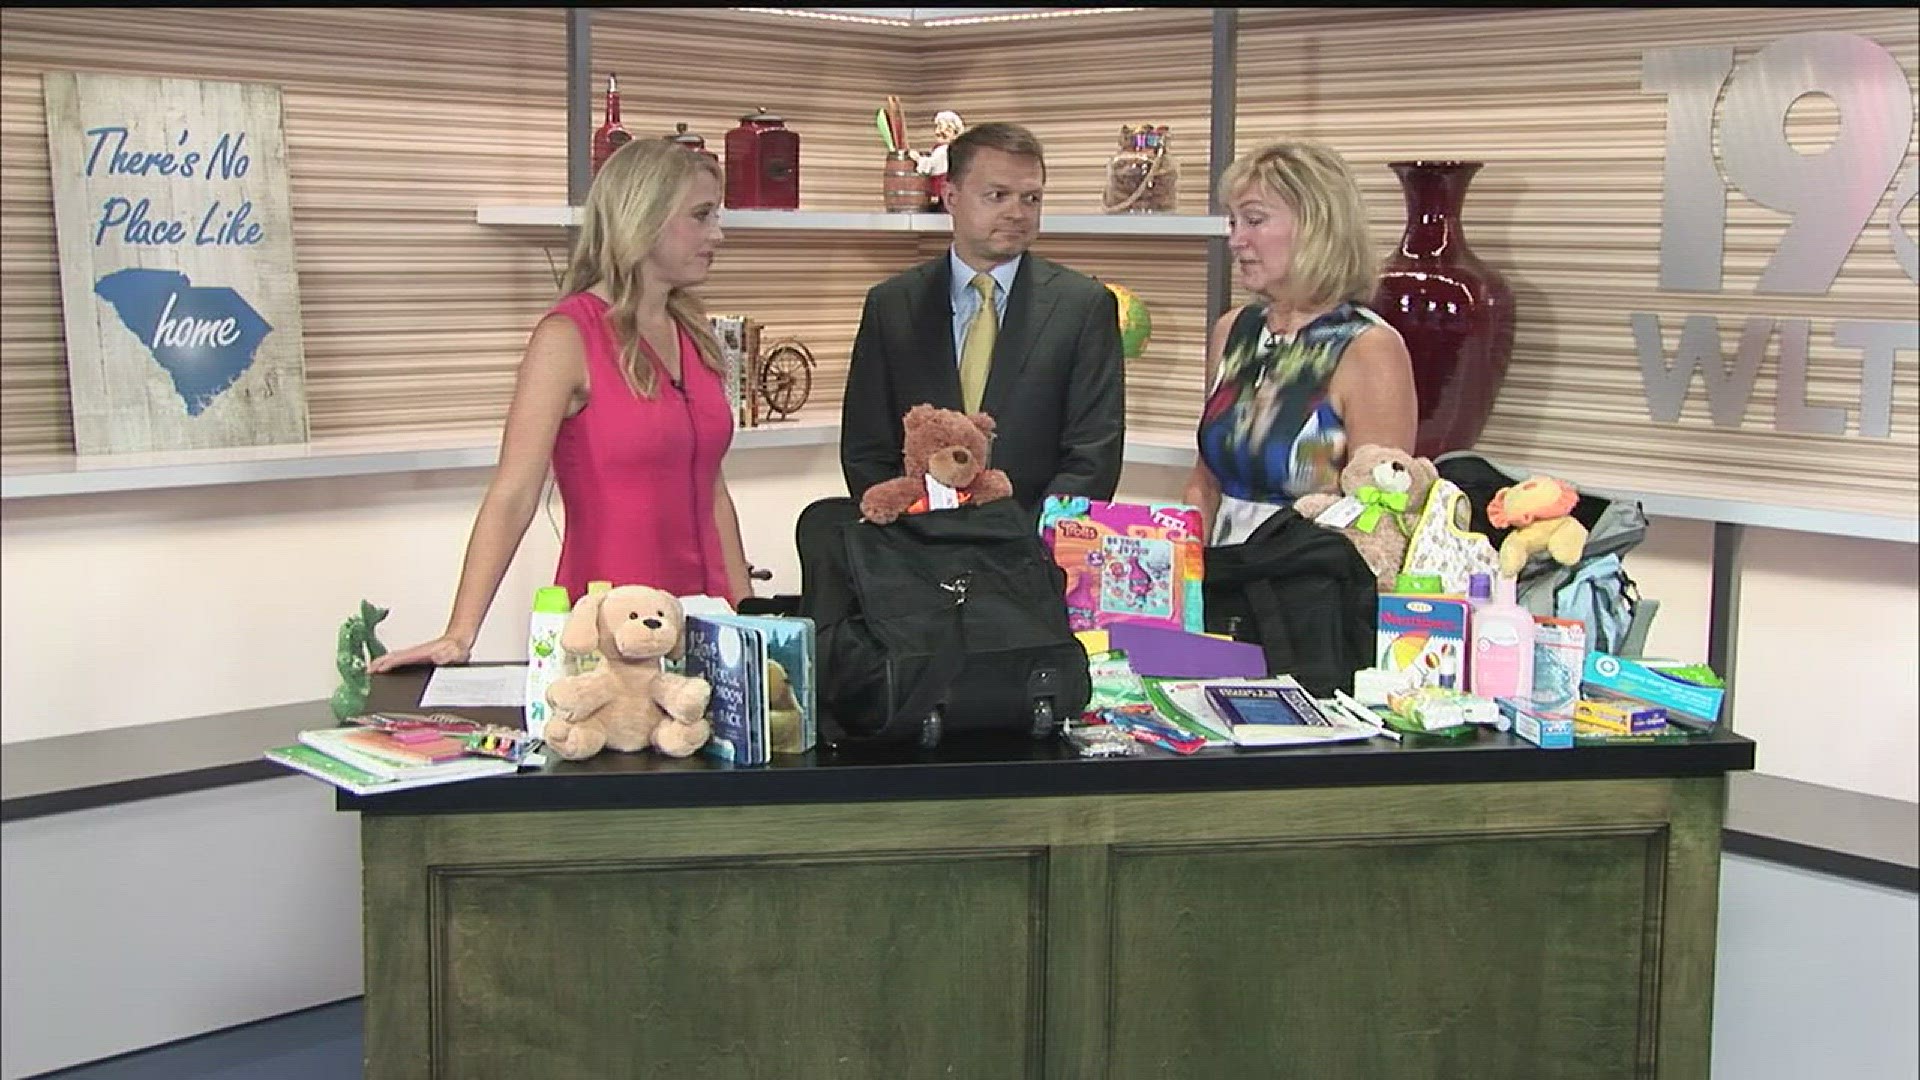 Gail Cole, from the SC Youth Advocate Program, and Christian Boesl, Attorney at Collins and Lacy, dropped by to talk about how you can make a difference by donating some very simple items to a family in need.